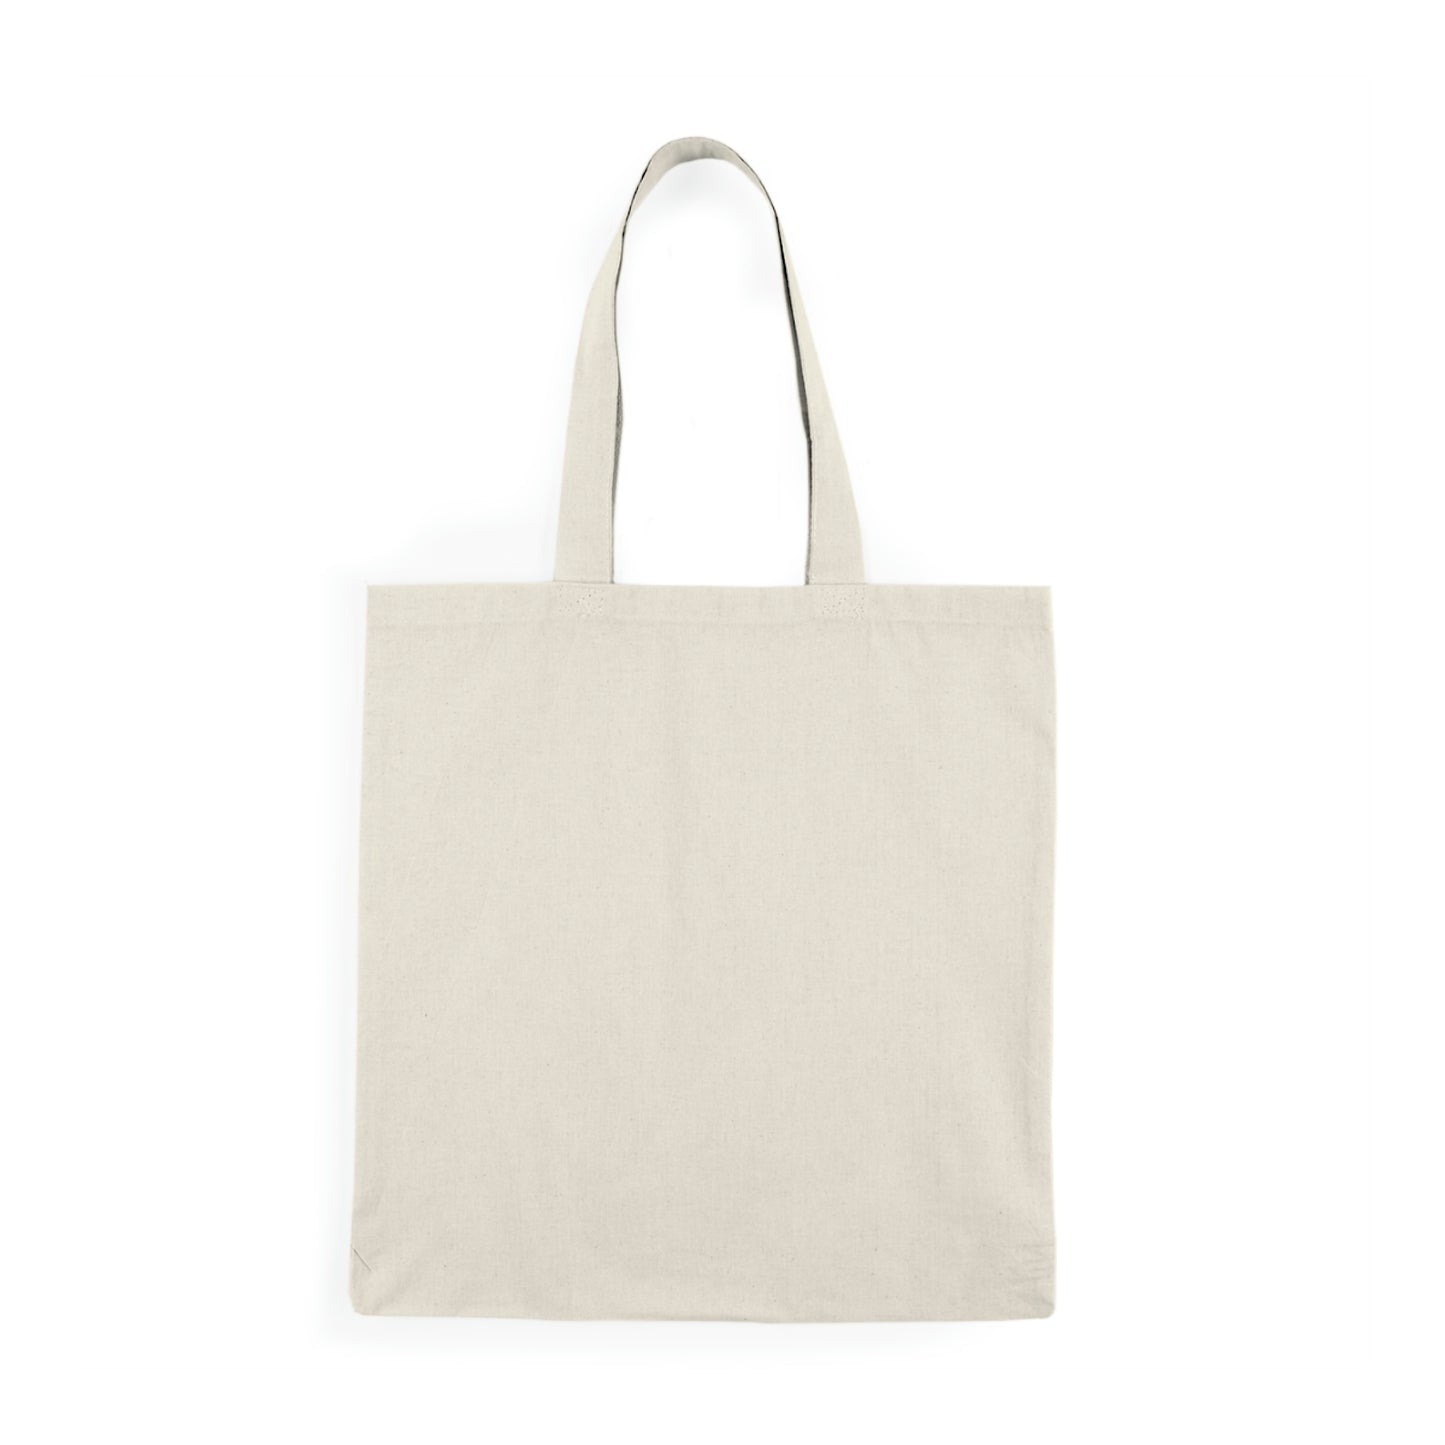 The Murder - Natural Tote Bag